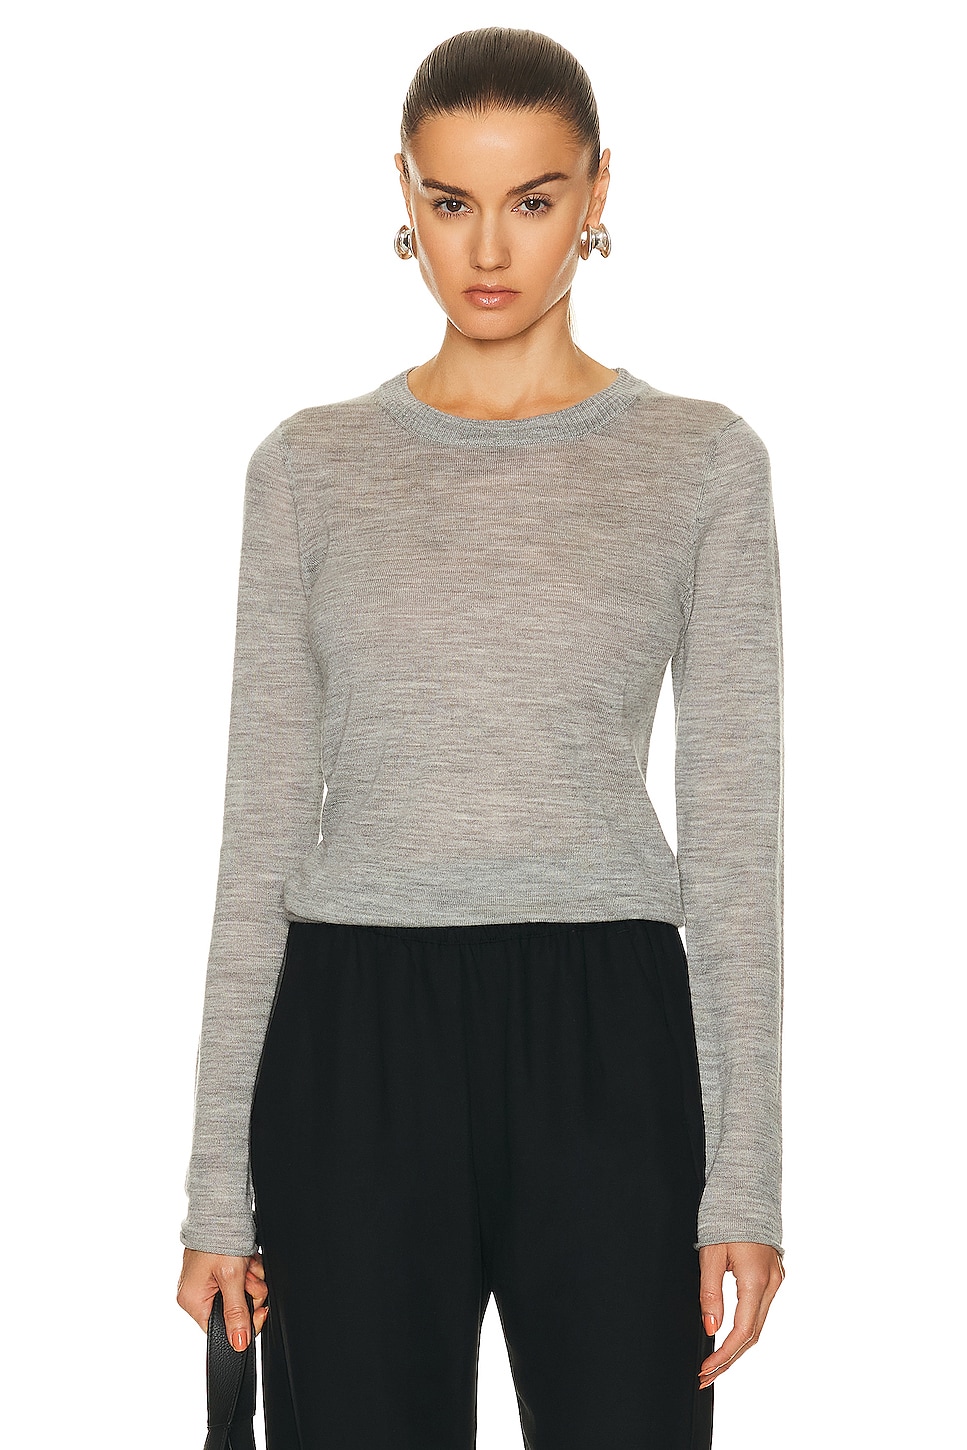 Image 1 of Enza Costa Tissue Cashmere Bold Long Sleeve Crew Top in Heather Grey